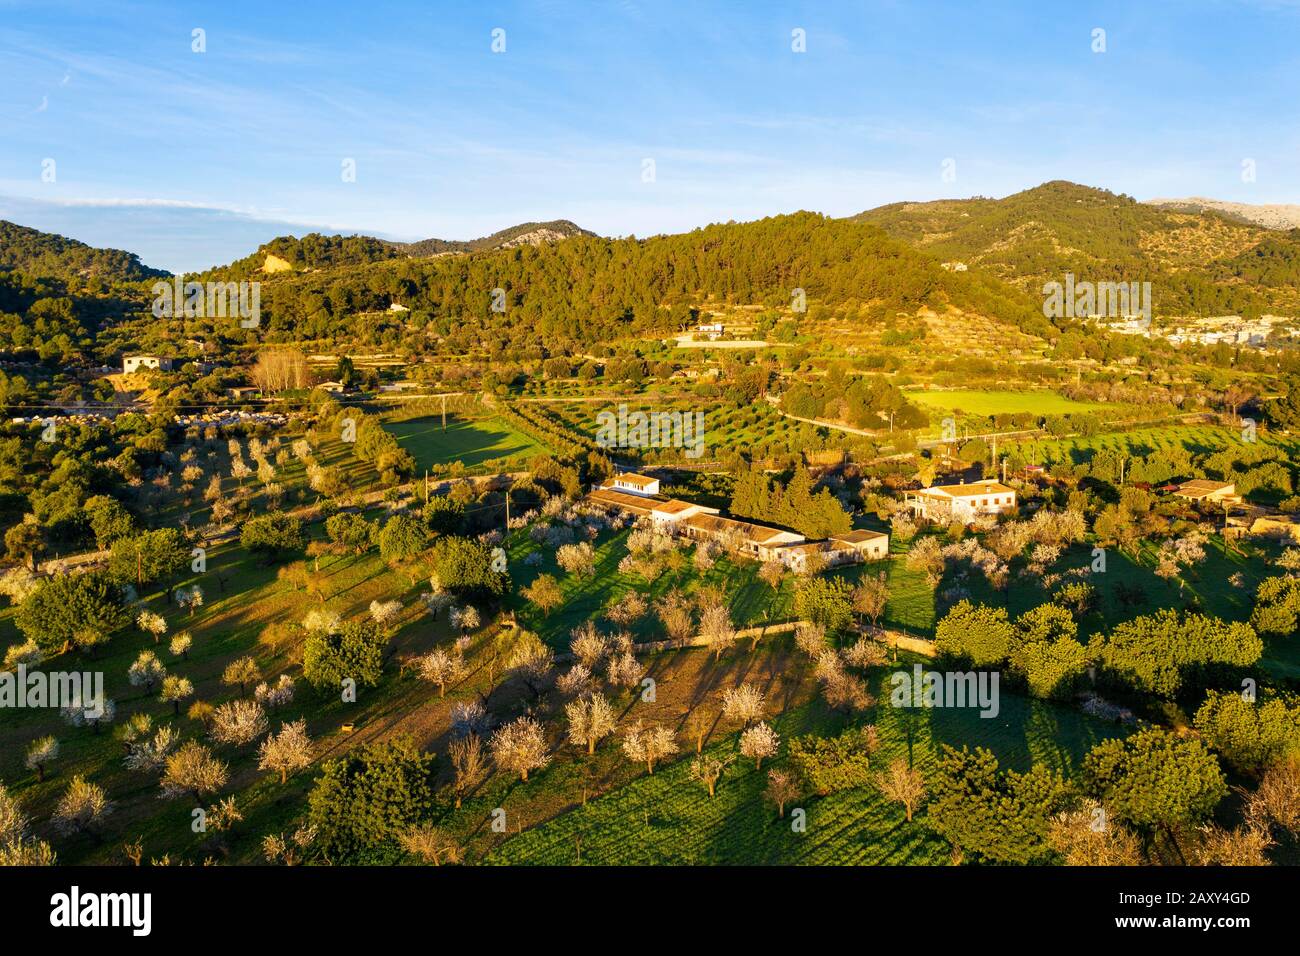 Almond blossom, flowering almond trees and finca in the morning light, near Mancor de la Vall, aerial view, Majorca, Balearic Islands, Spain Stock Photo